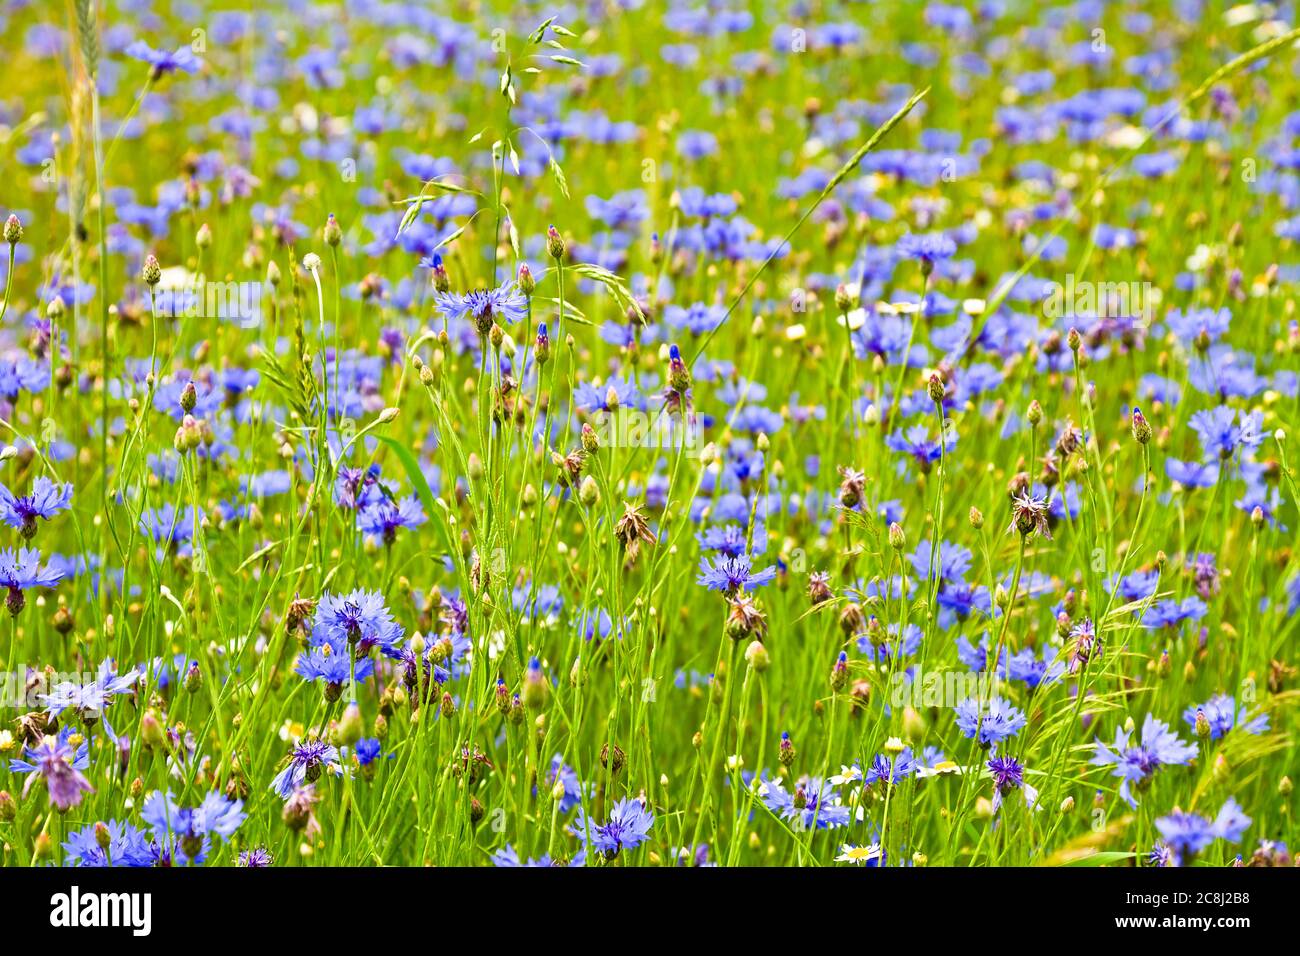 Blue flowers in the field Stock Photo